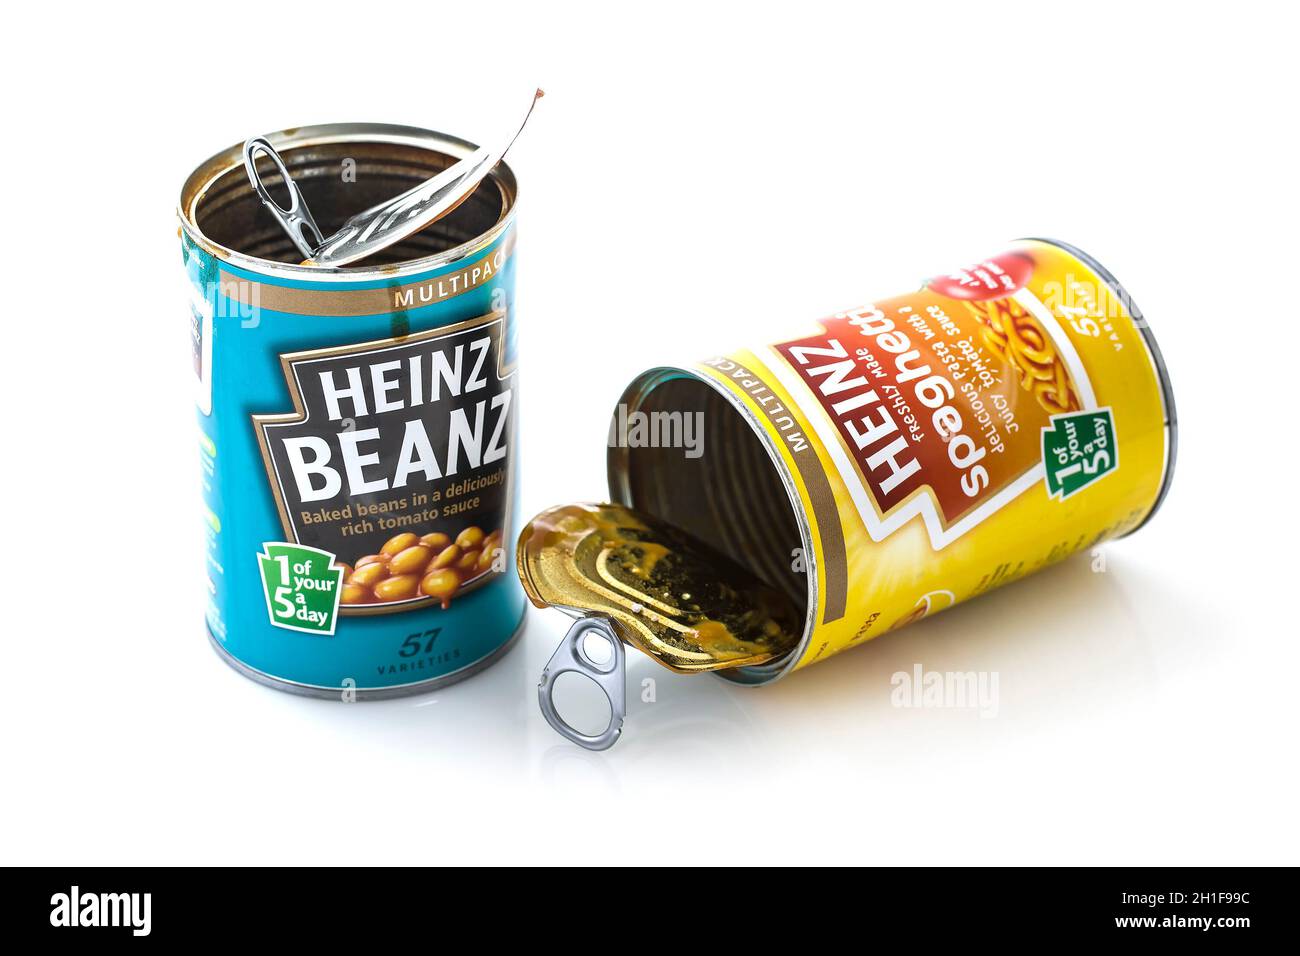 SWINDON, UK - AUGUST 10, 2014: Cans of Heinz Beanz and Spaghetti isolated on white background. Stock Photo